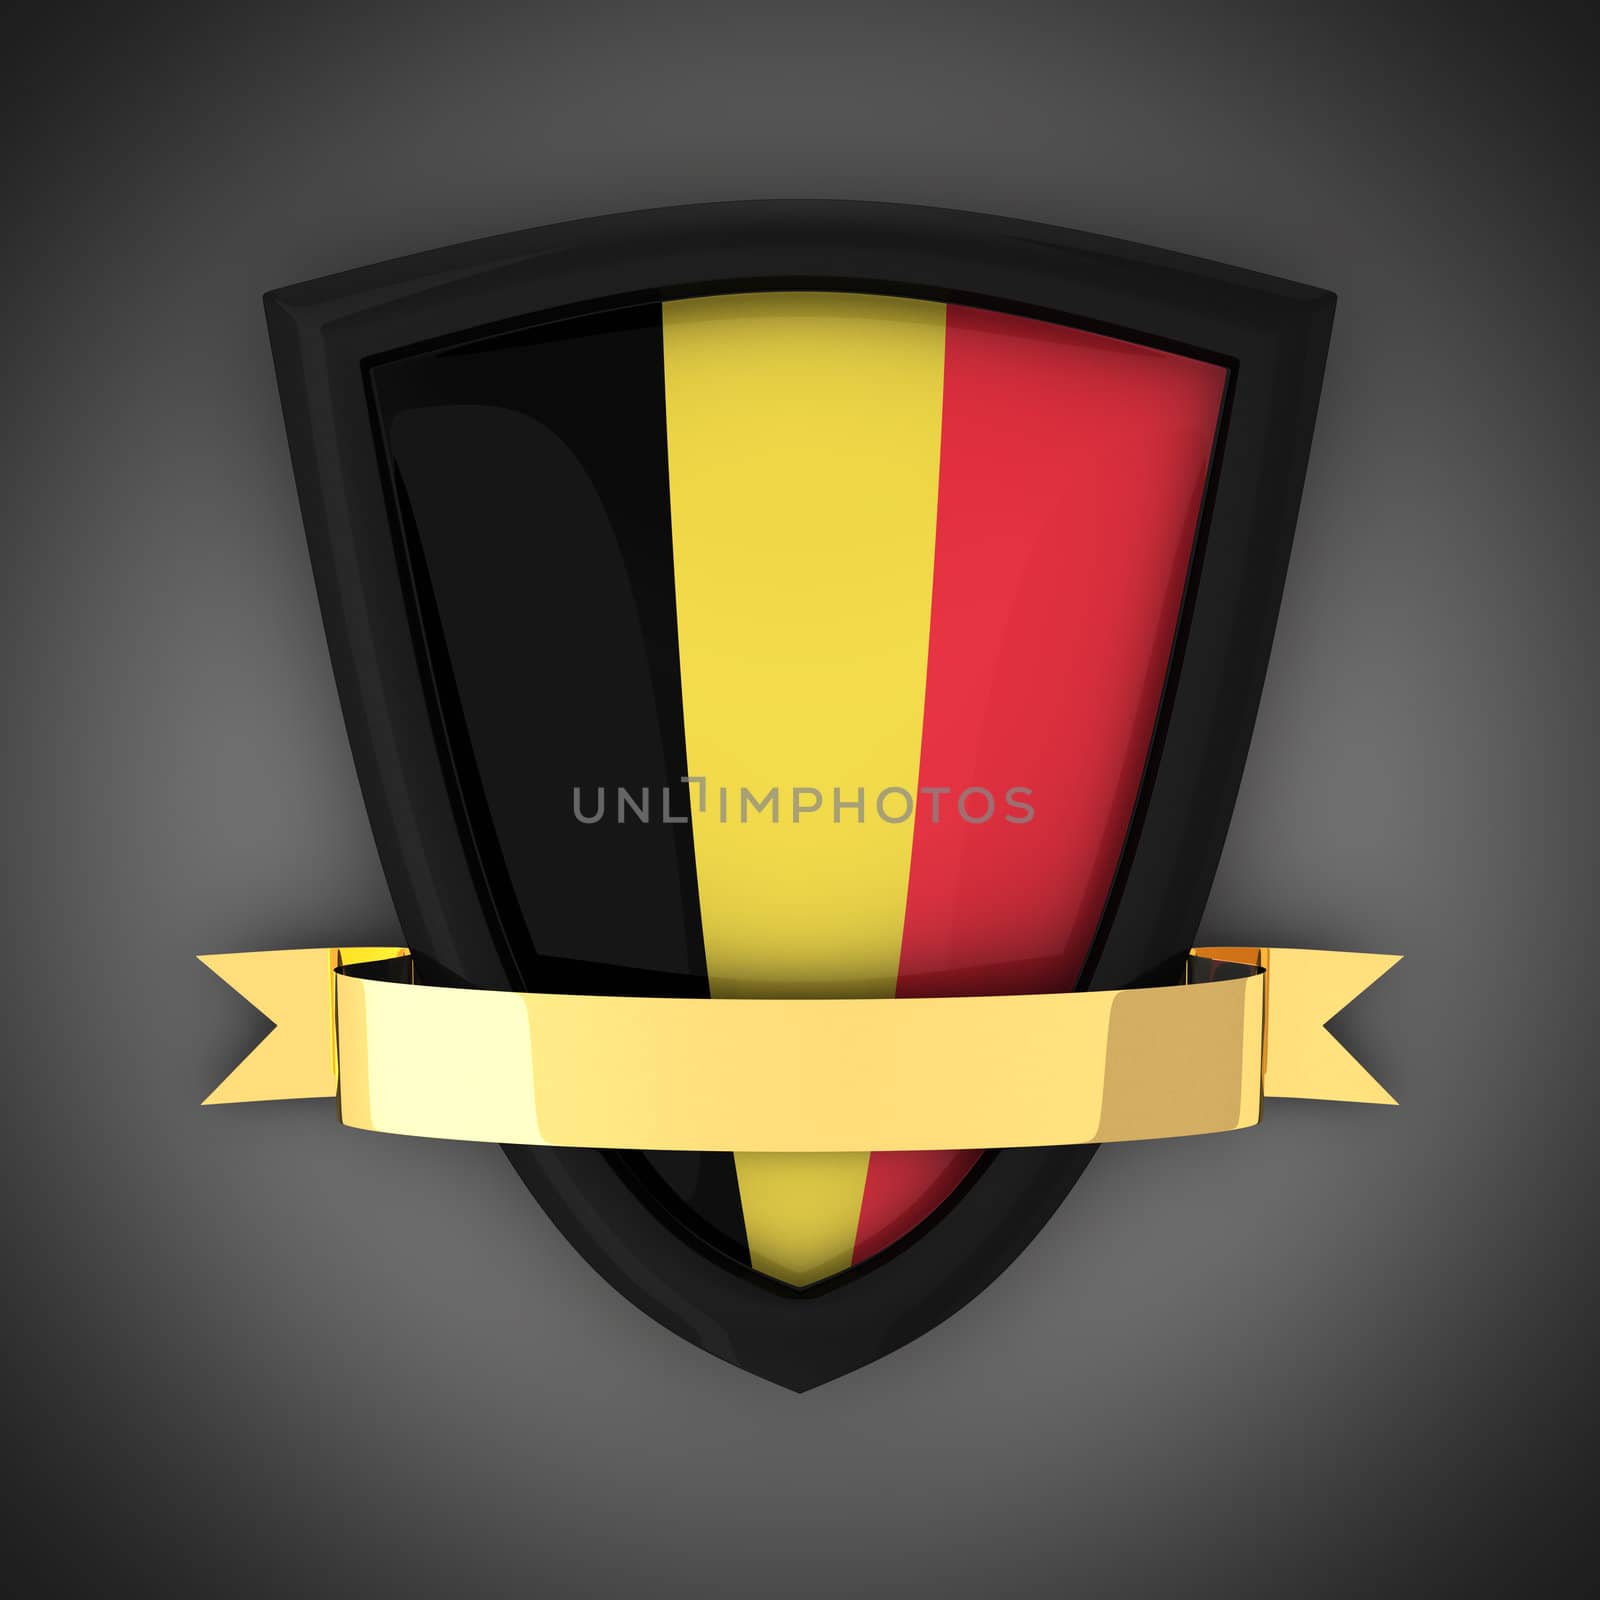 The shield in the colors of the flag of Belgium and gold ribbon